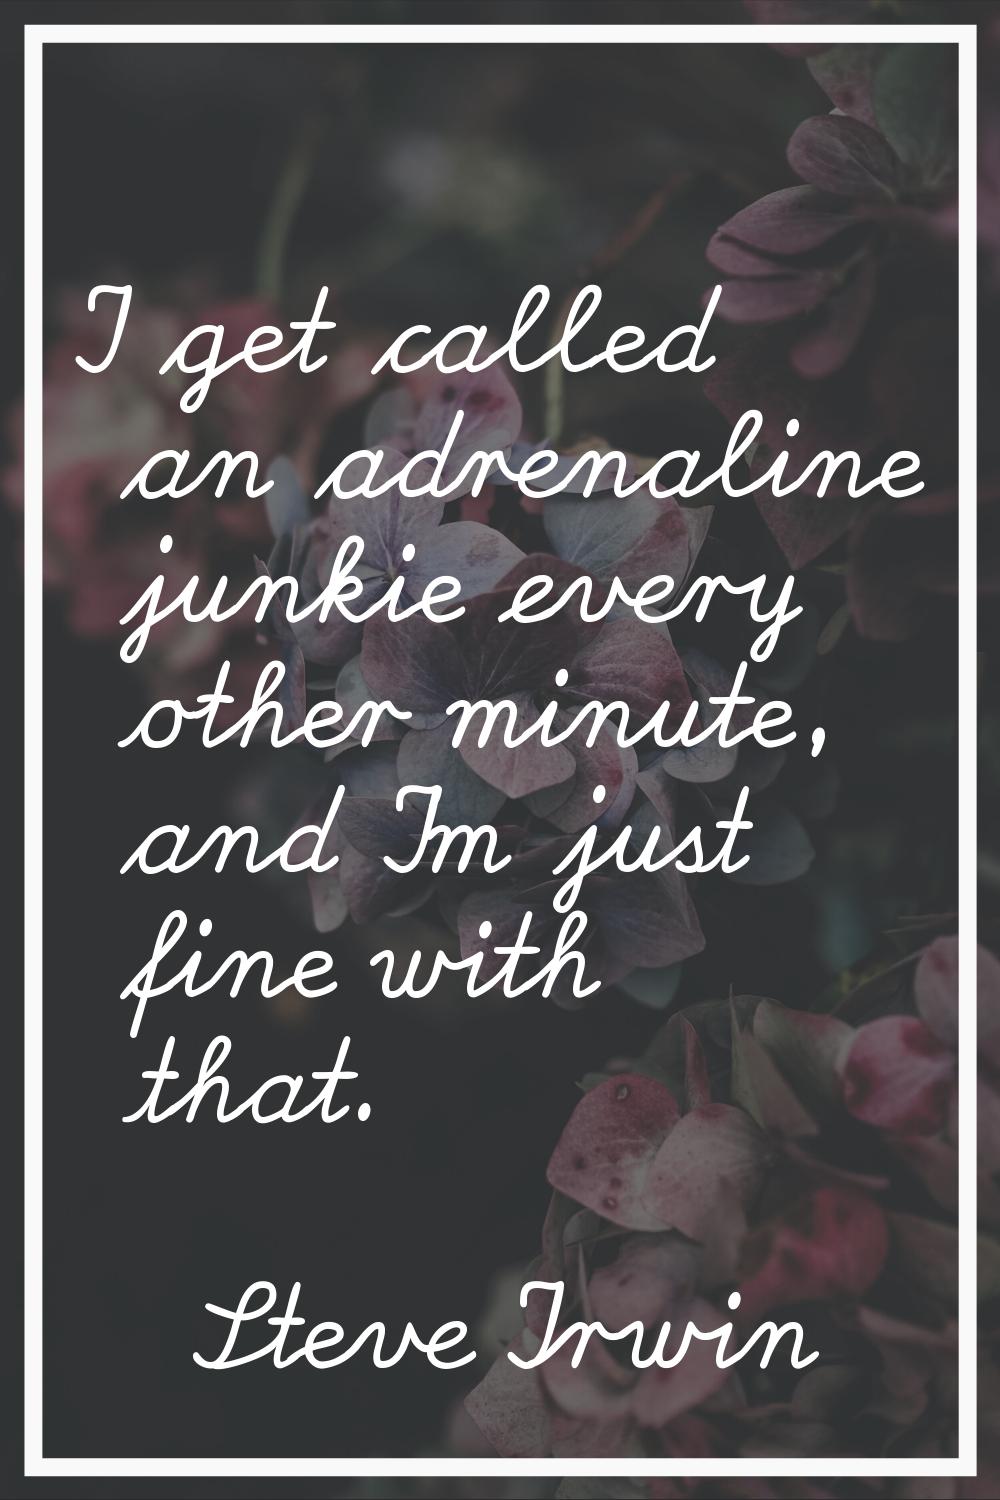 I get called an adrenaline junkie every other minute, and I'm just fine with that.